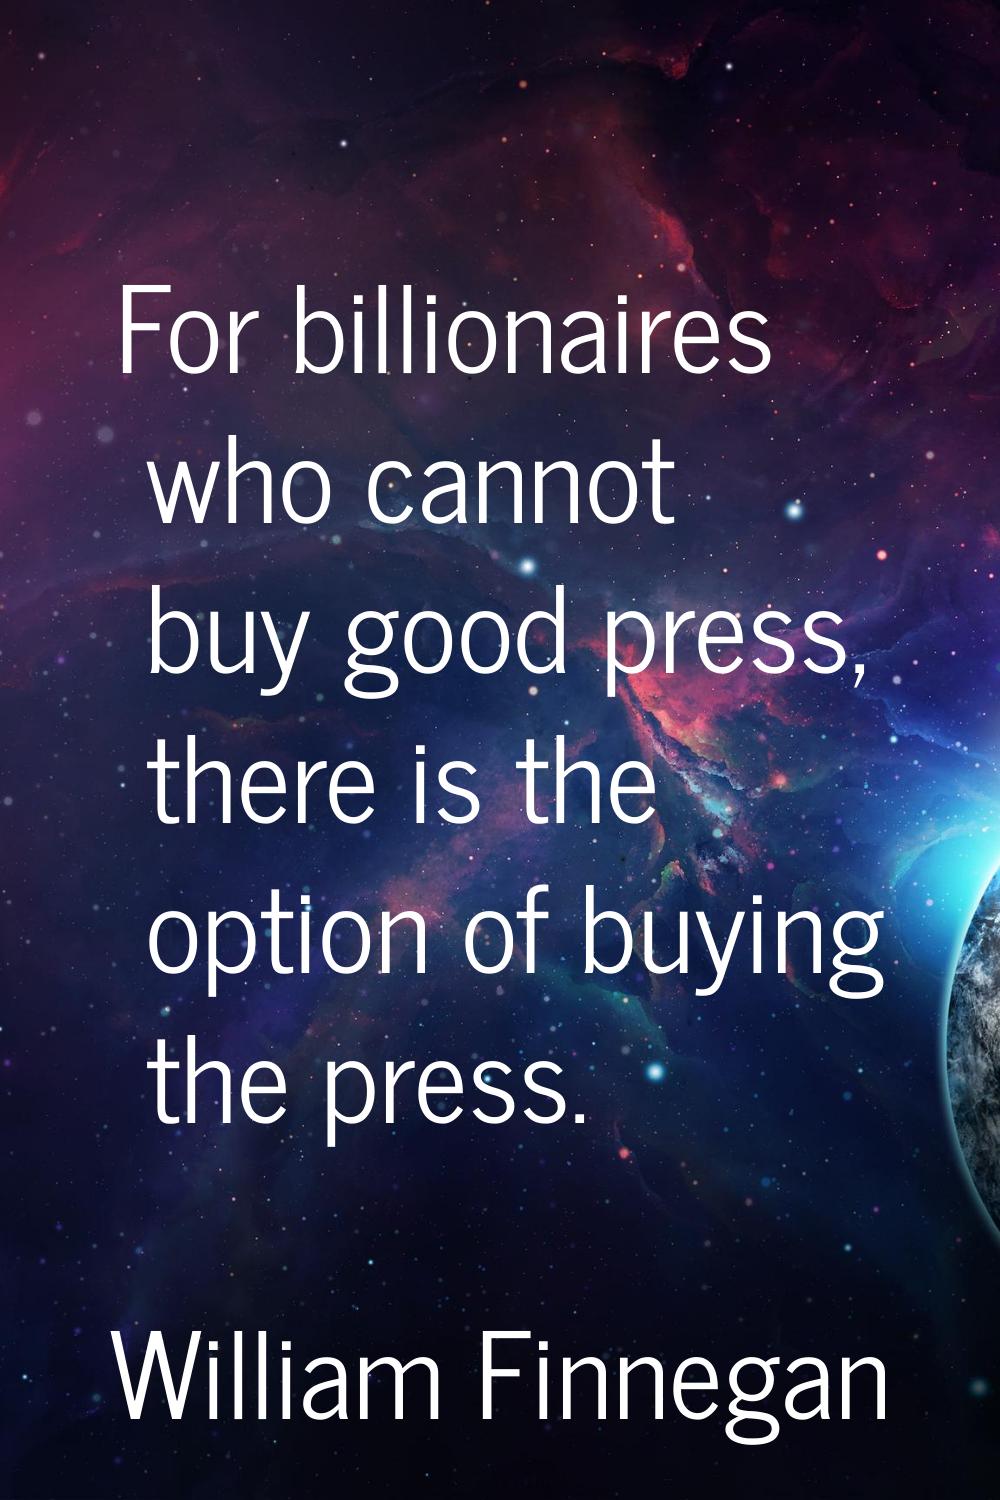 For billionaires who cannot buy good press, there is the option of buying the press.